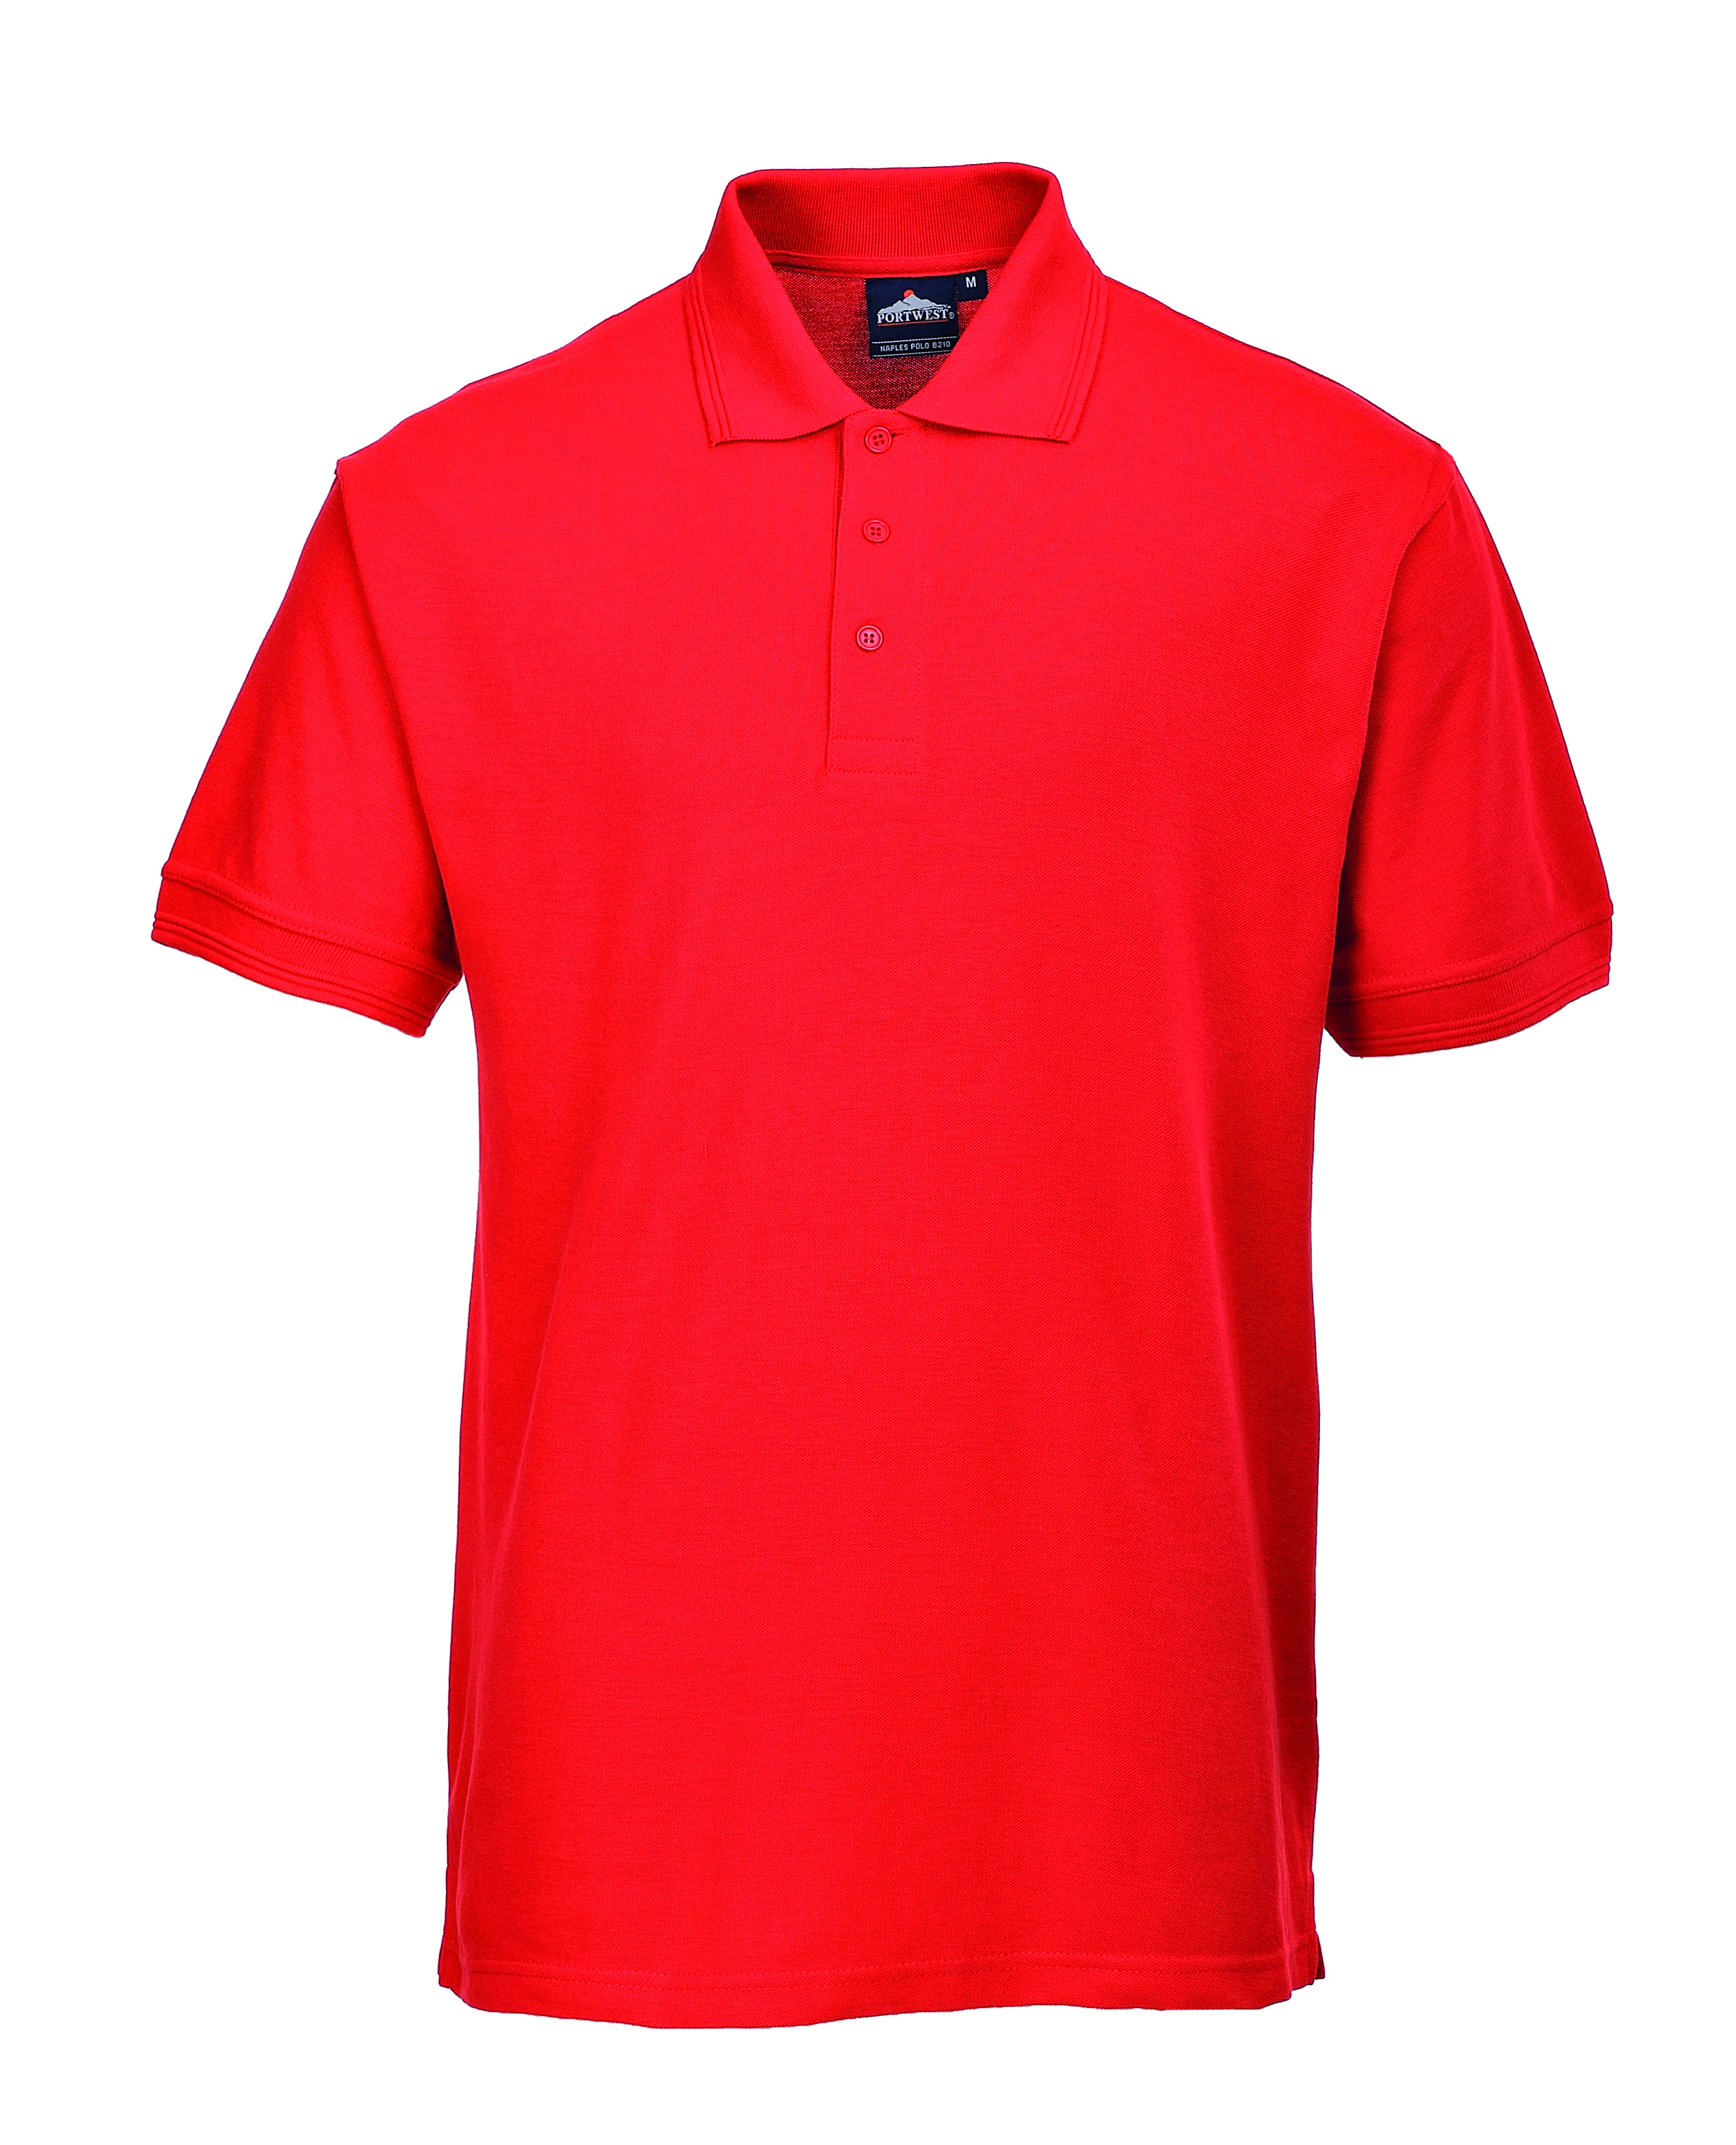 ax-httpss3.eu-west-2.amazonaws.comwebsystemstmp_for_downloadportwest-naples-polo-shirt-red.jpeg